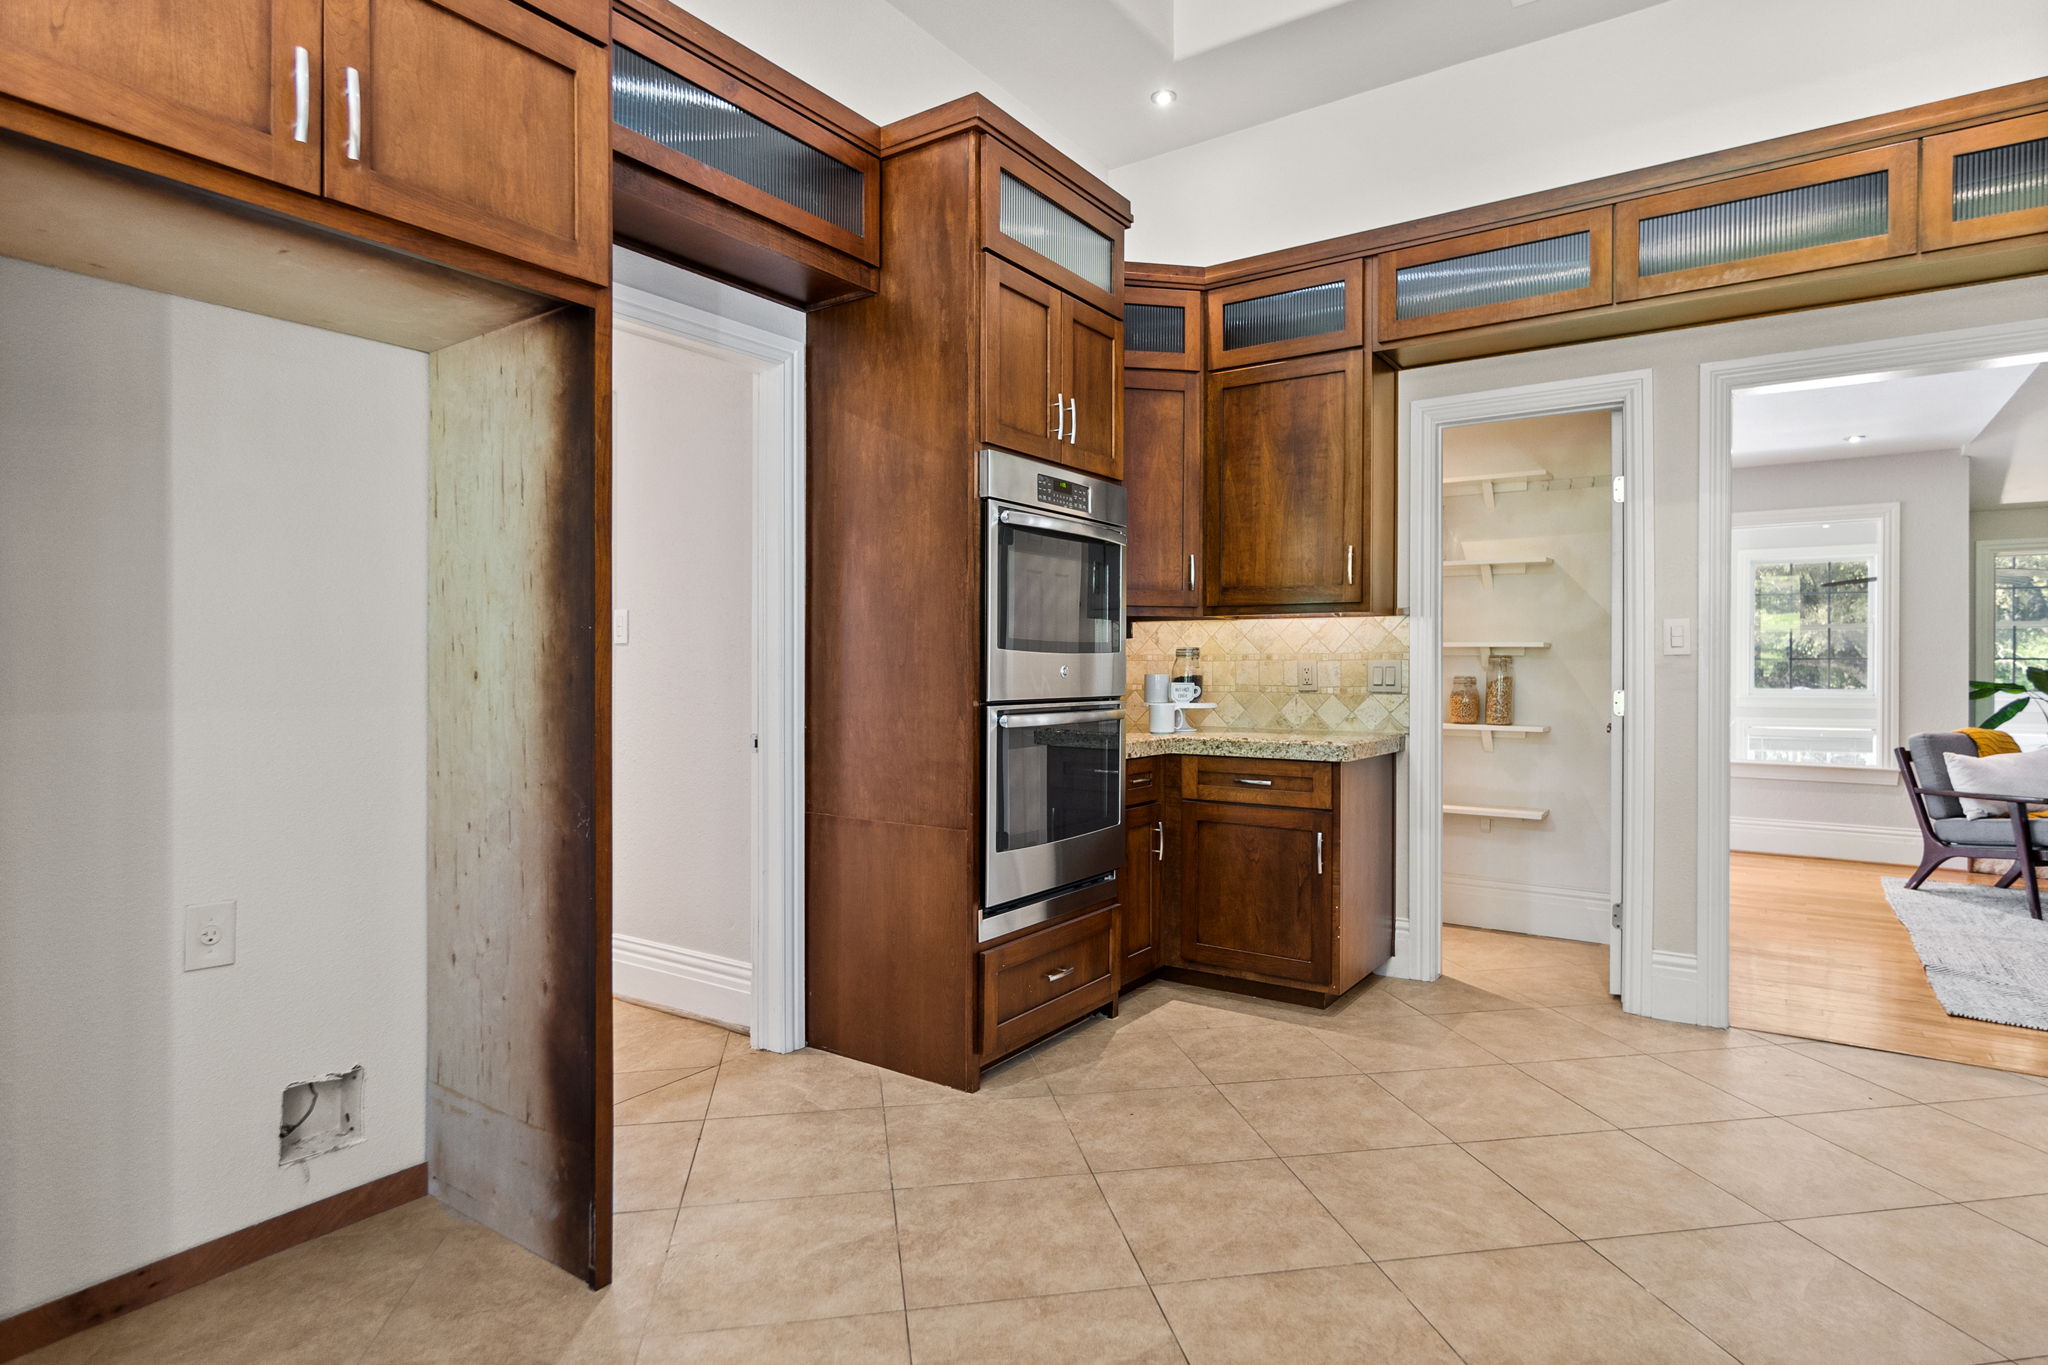 Double ovens, walk-in pantry, custom, high-end maple cabinets